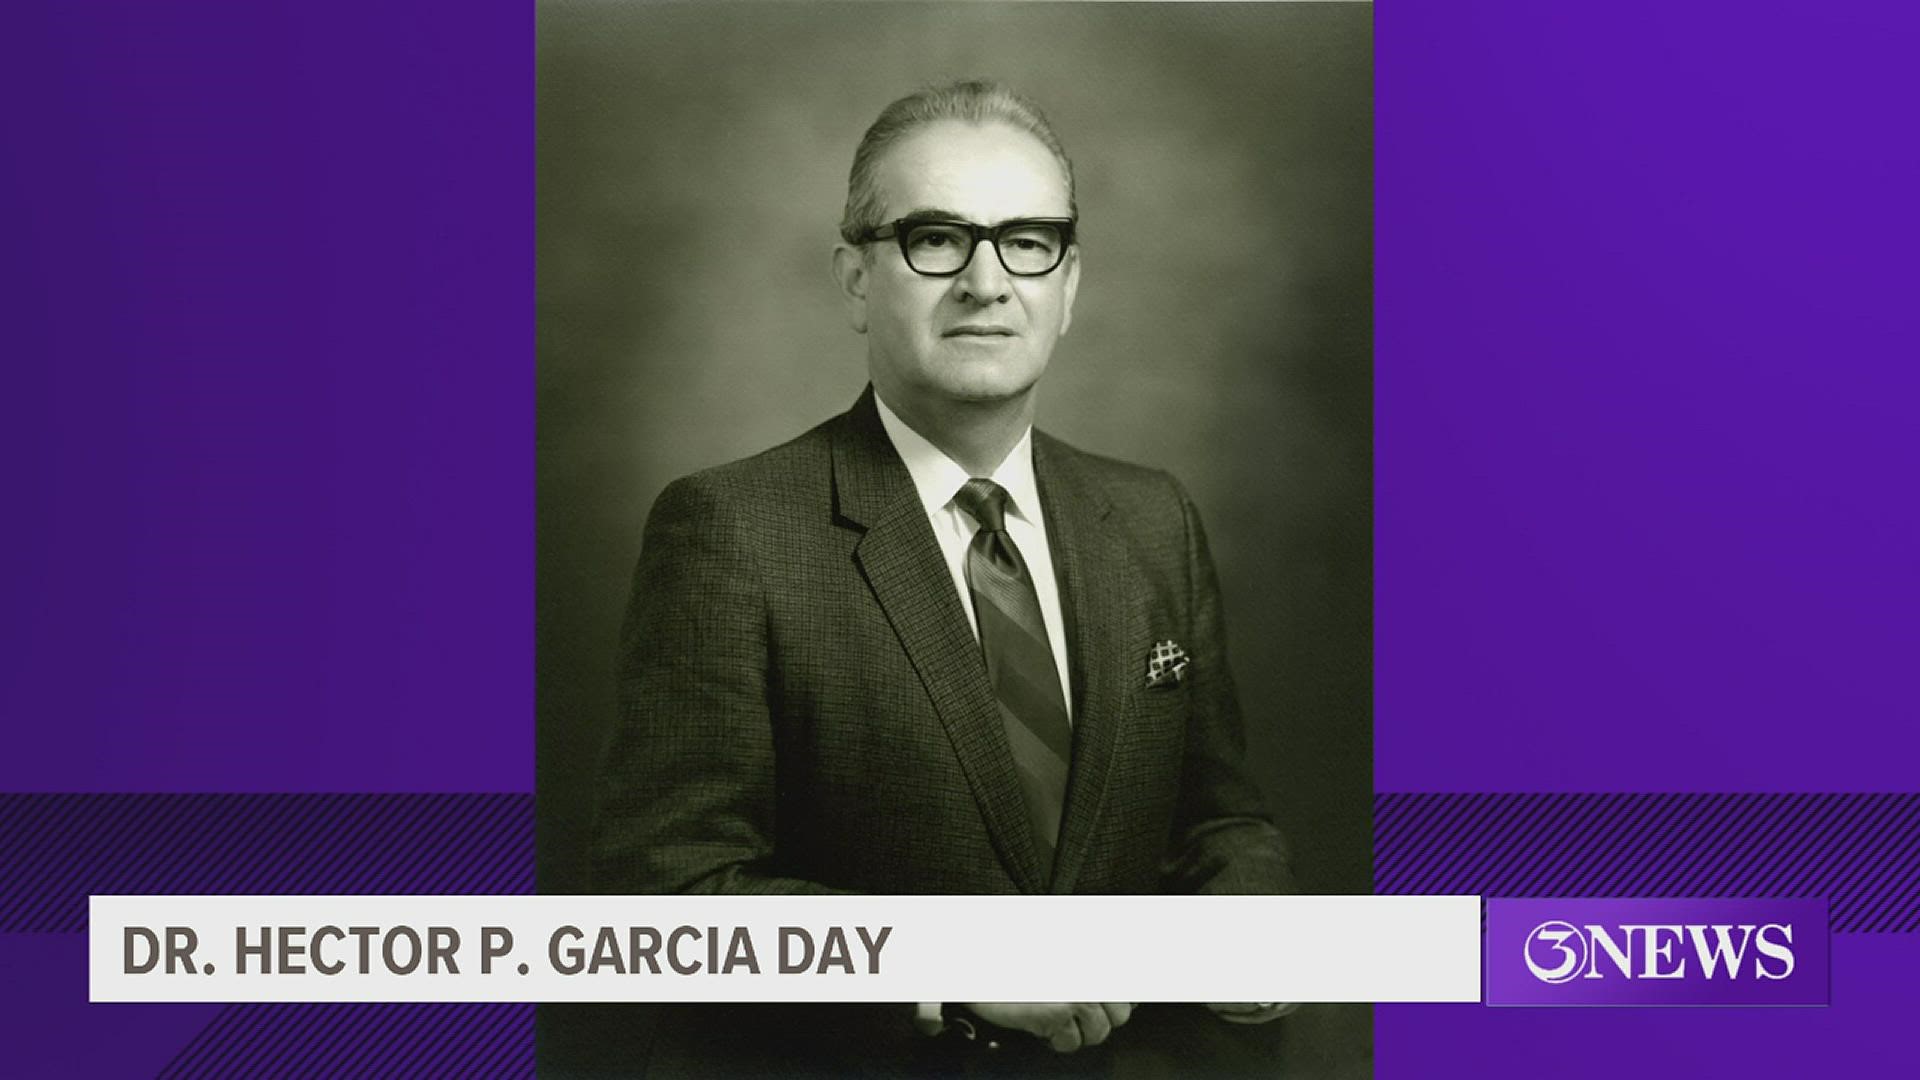 An immigrant turned civil rights leader and founder of the American GI Forum, Hector P. Garcia's legacy lives on.